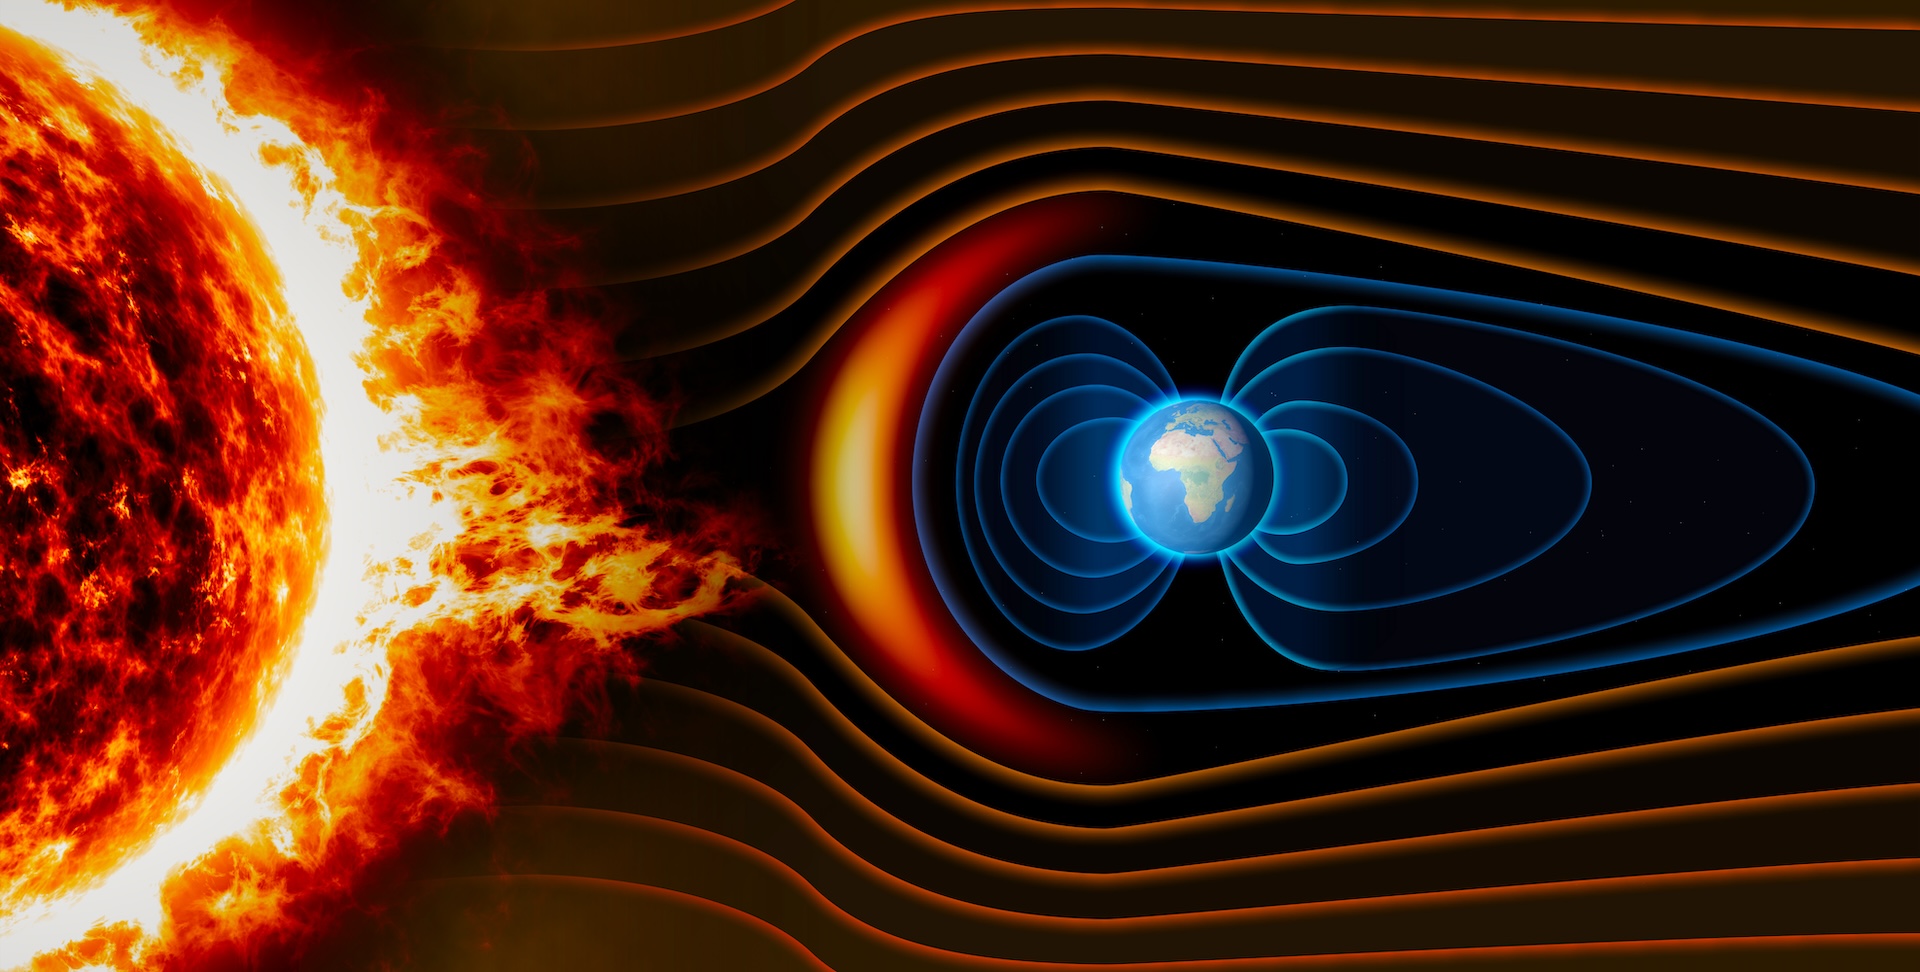 An illustration of the fiery sun and earth, with solar wind going around earth's magnetic field.